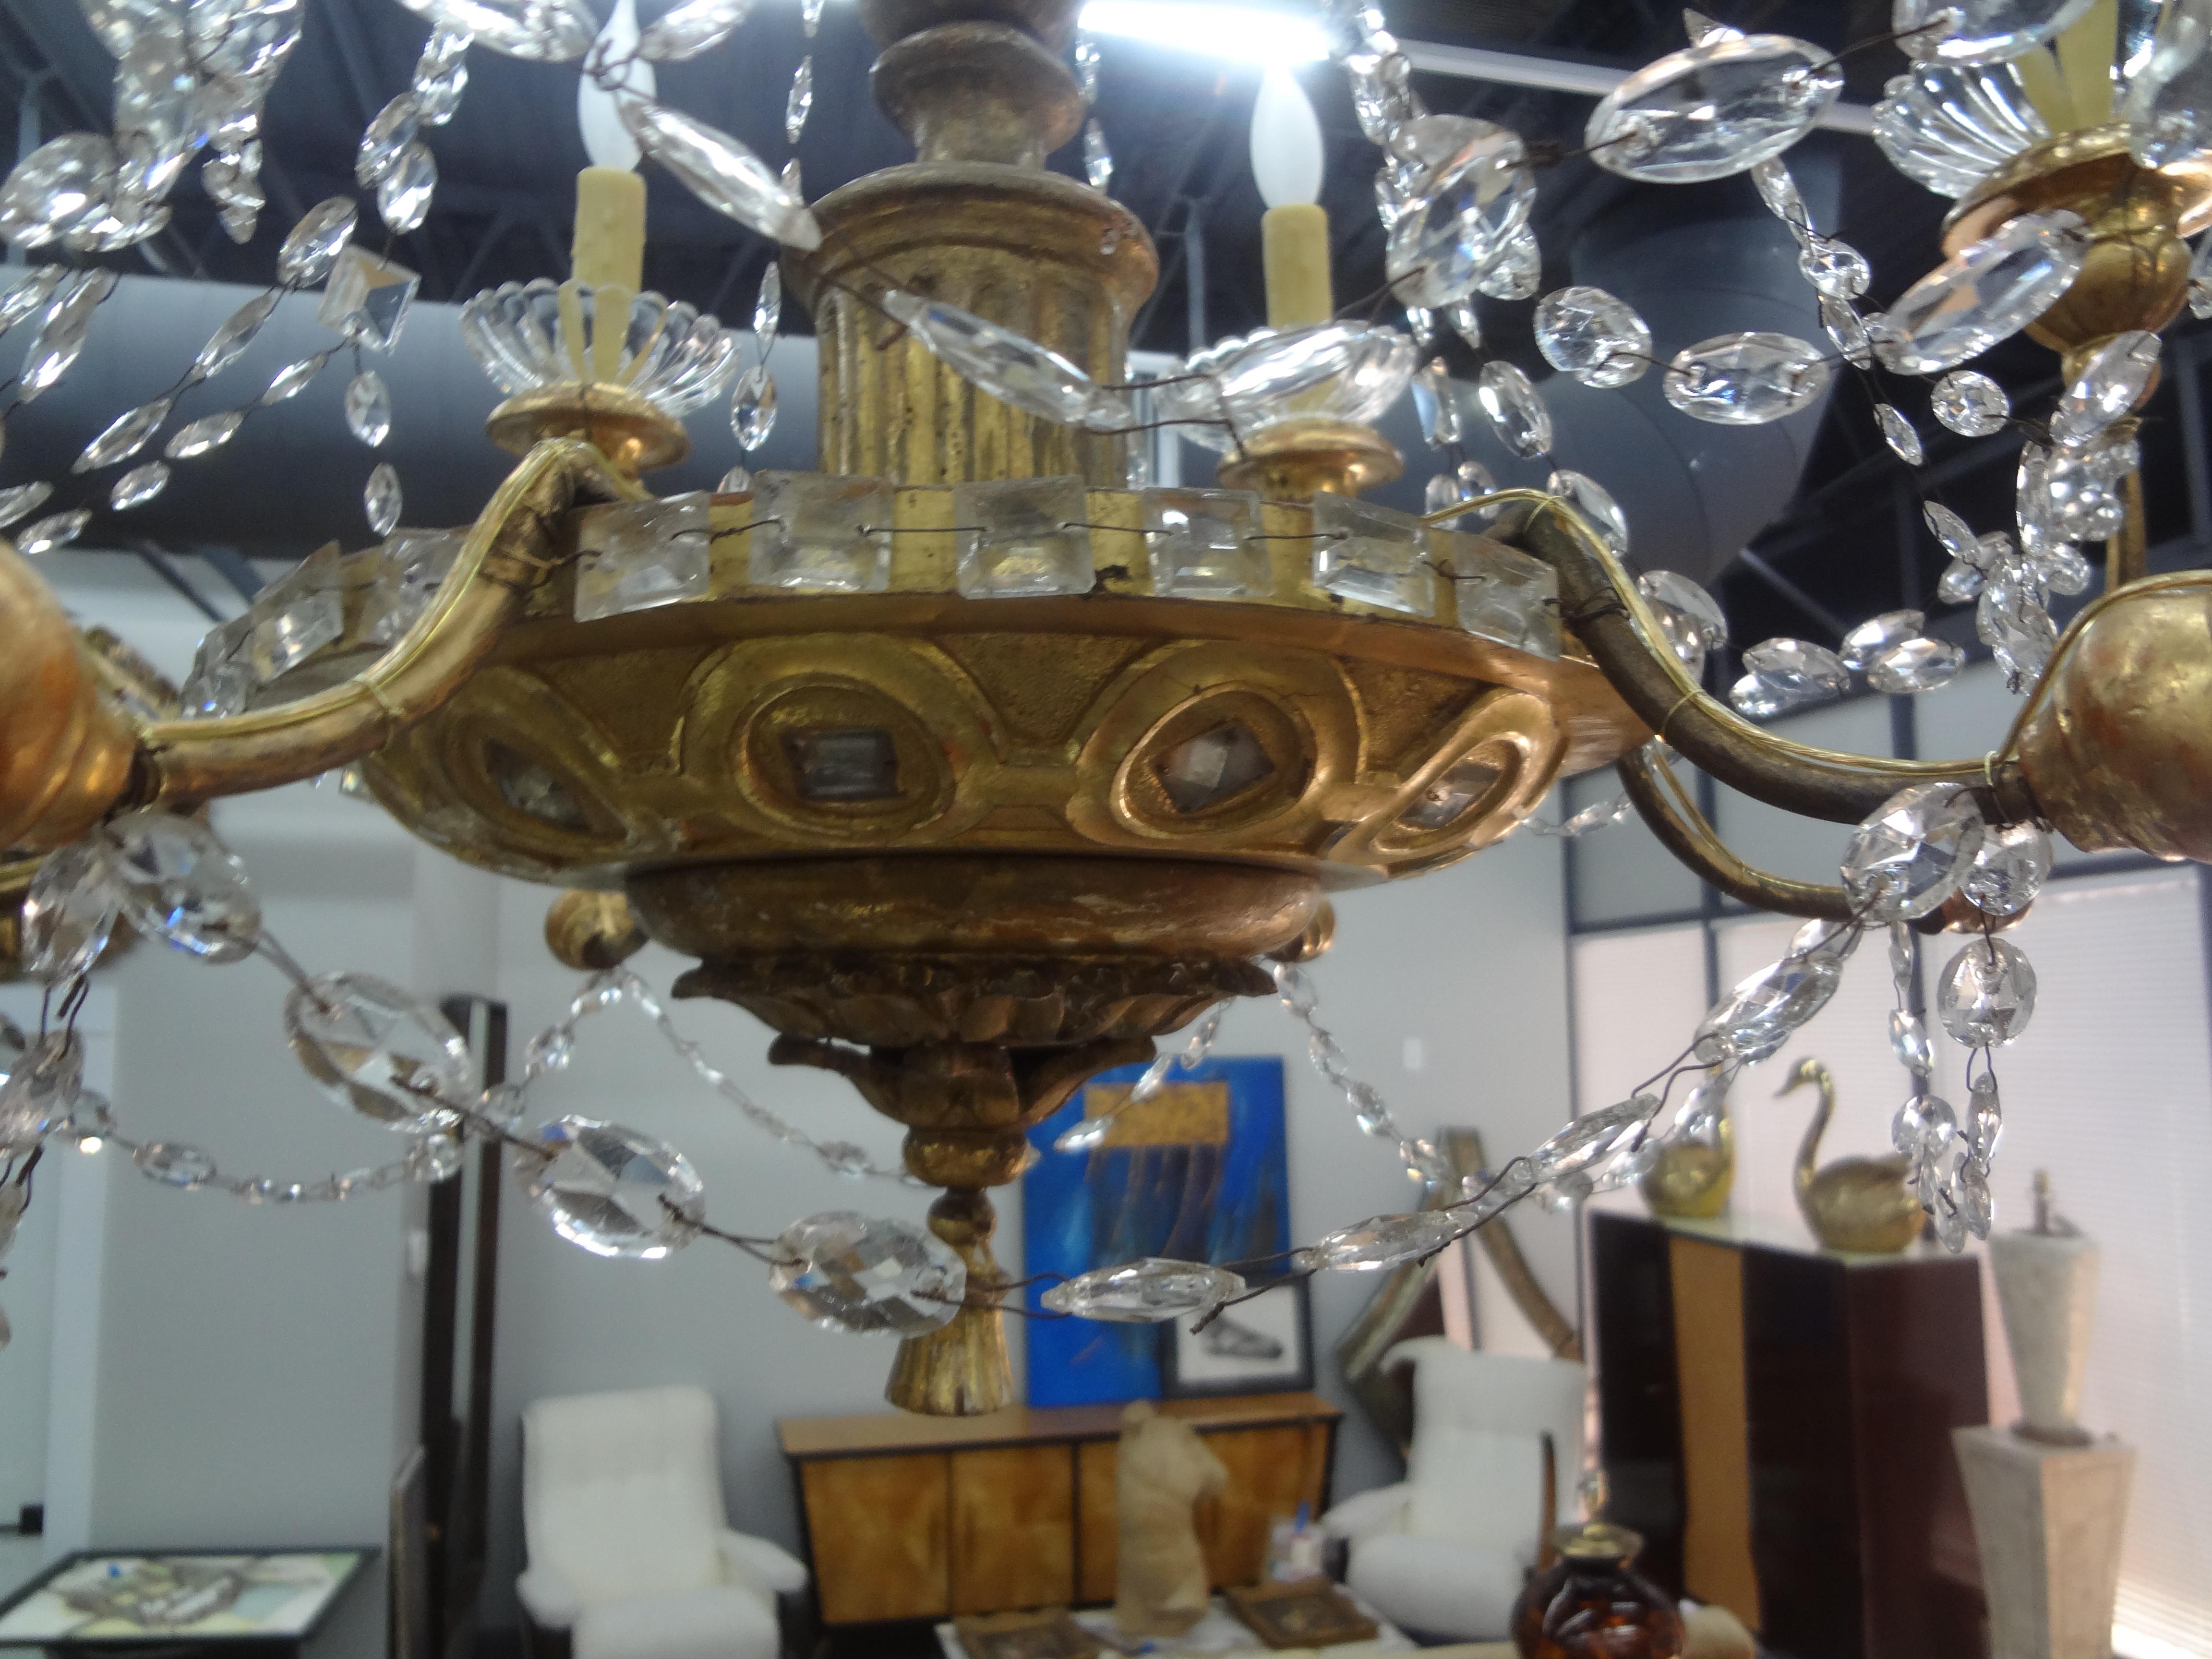 19th century Genovese giltwood and crystal chandelier.
This outstanding antique Italian Genovese gilt wood and crystal six light chandelier has the most unusual mirrored detail with rectangular prisms.
This gorgeous Italian Baroque chandelier has